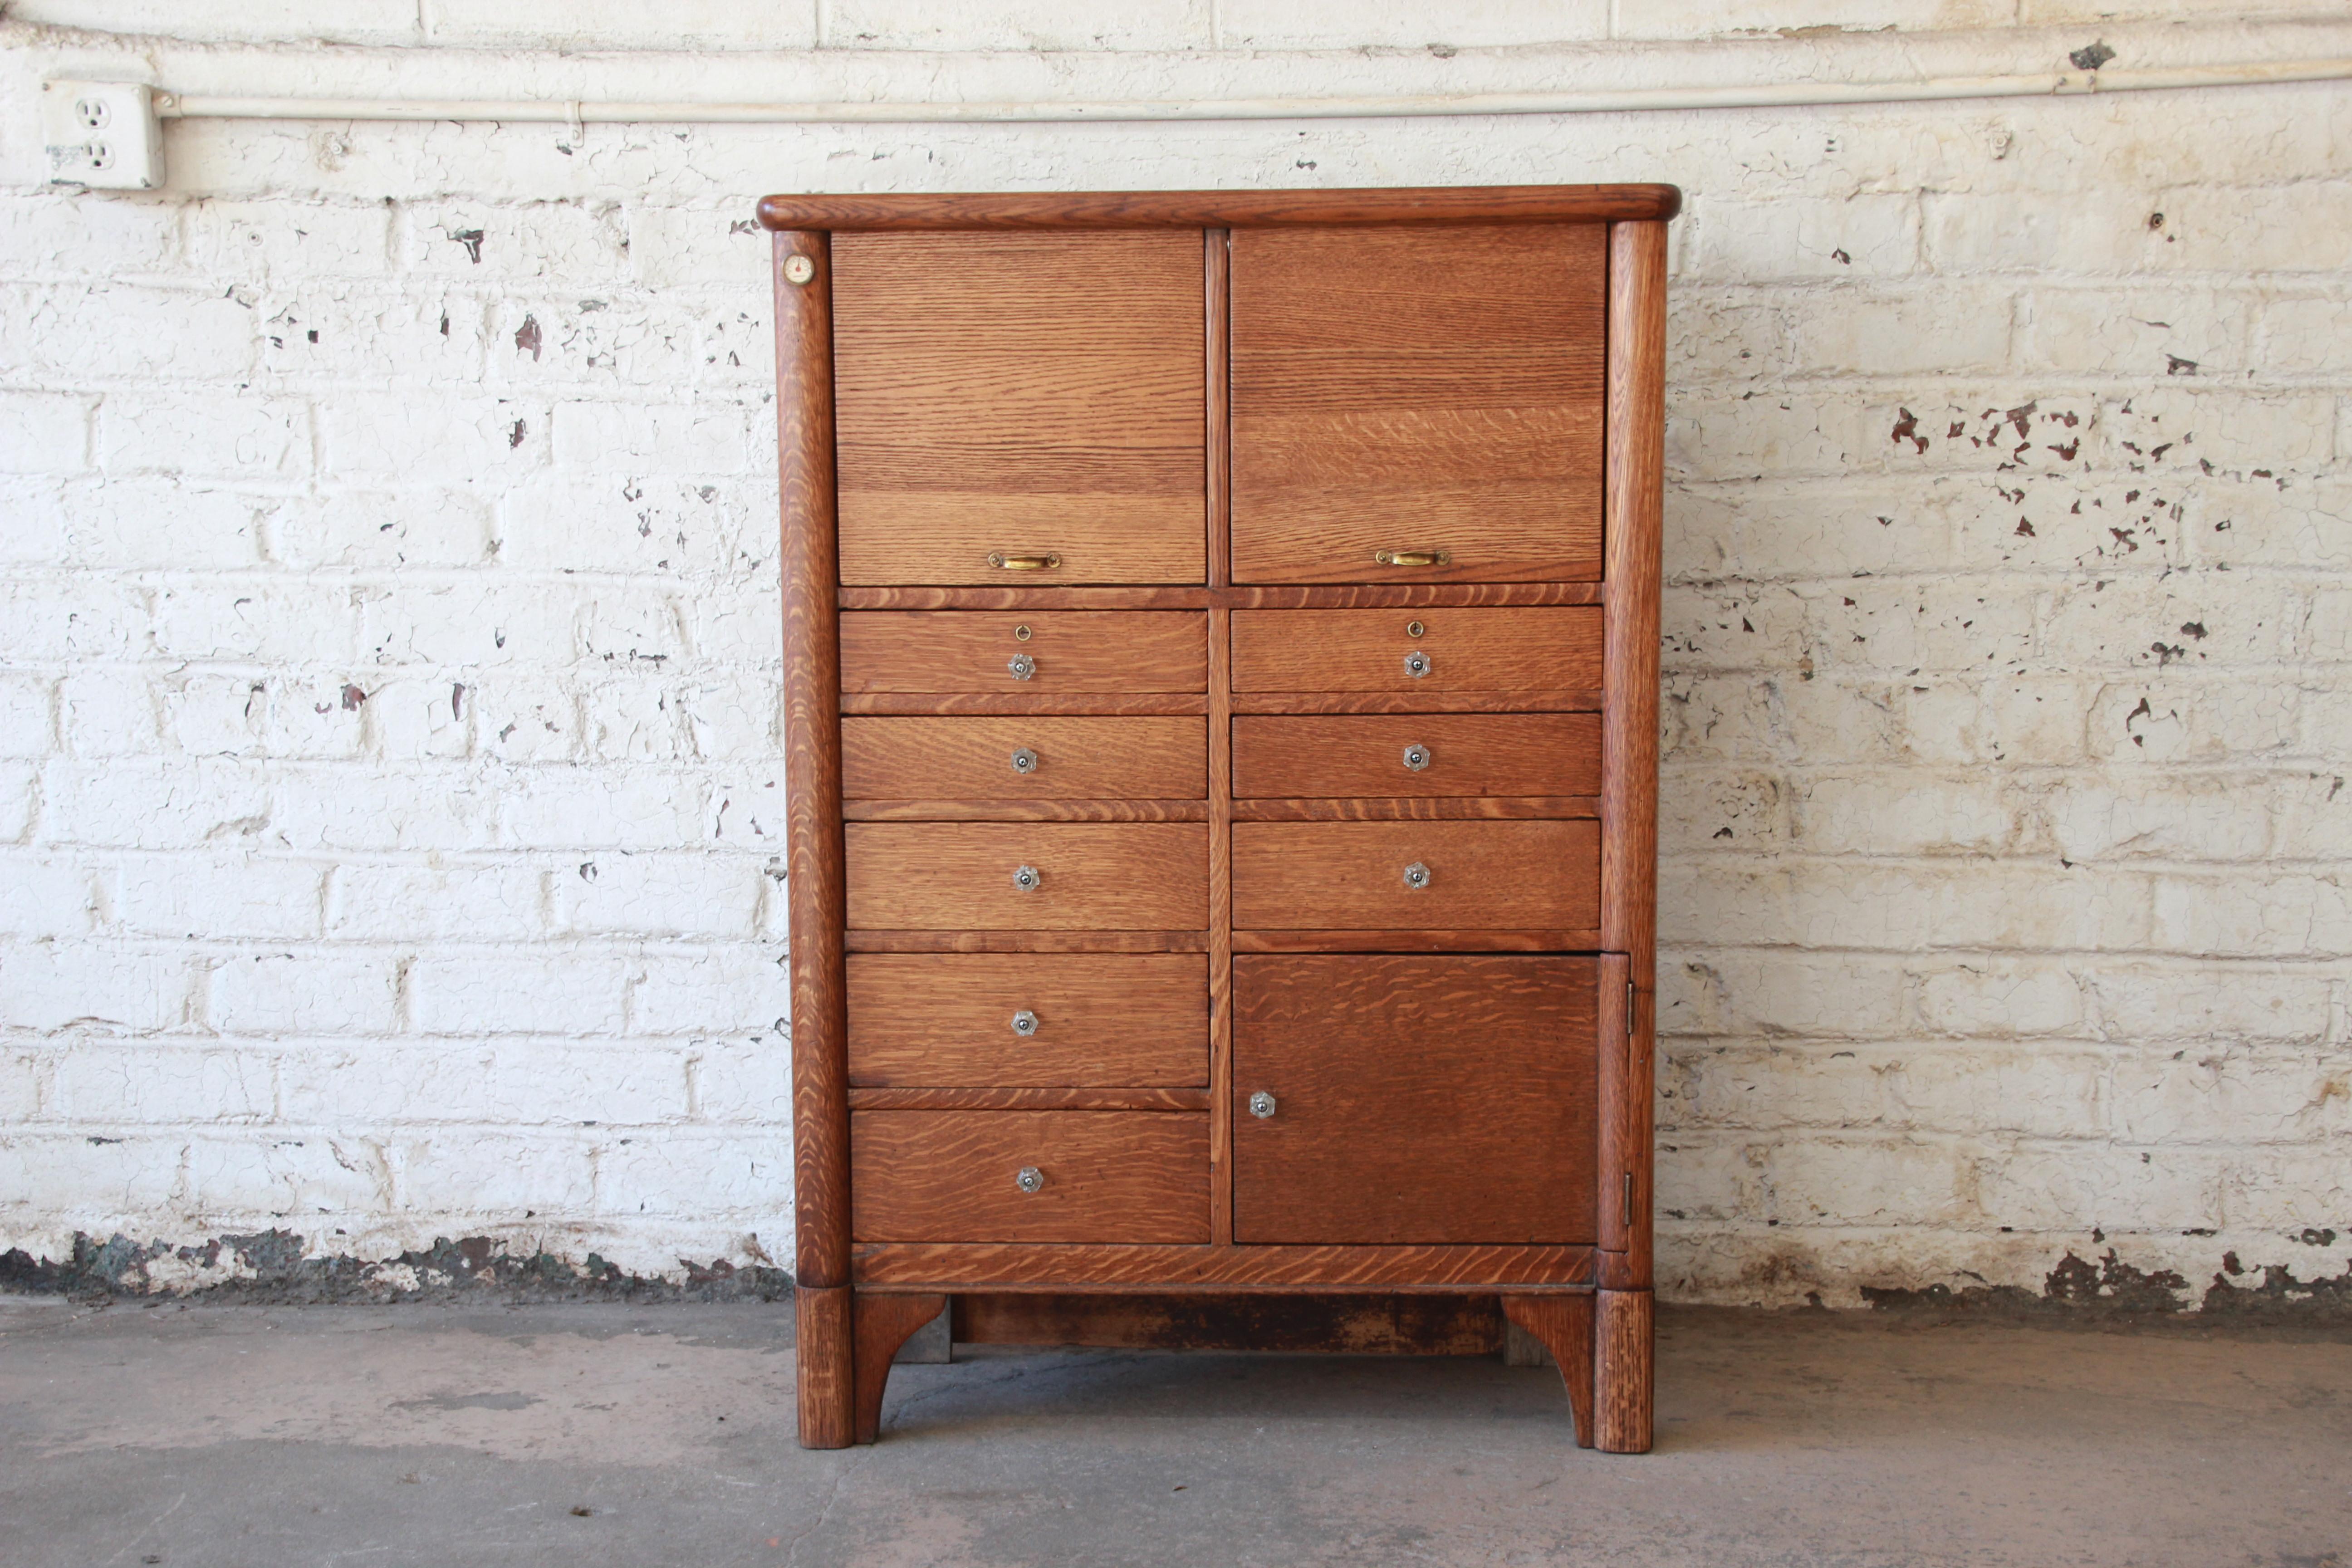 A rare and exceptional antique oak dental or medical cabinet. The cabinet features solid oak construction and all original hardware. It offers ample room for storage, with 22 drawers as well as a cabinet space behind one door. It also has a built-in